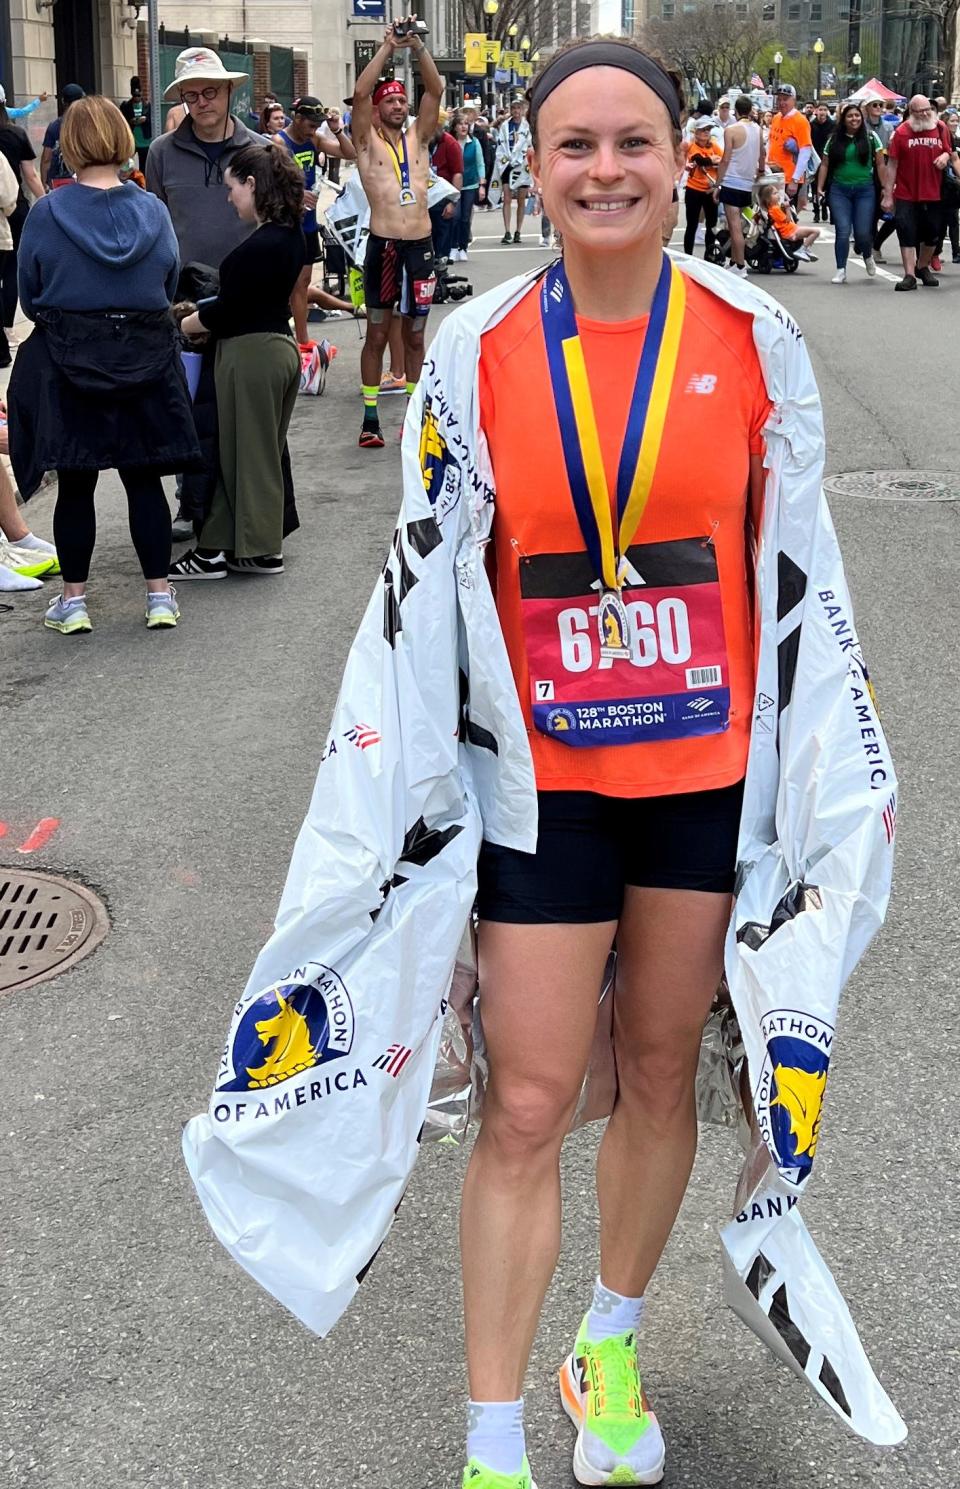 Winnacunnet High School spring track coach Cassie Kruse, who ran for the University of New Hampshire, completed her fourth Boston Marathon on Monday in a personal best time of 3 hours, 05.5 minutes.